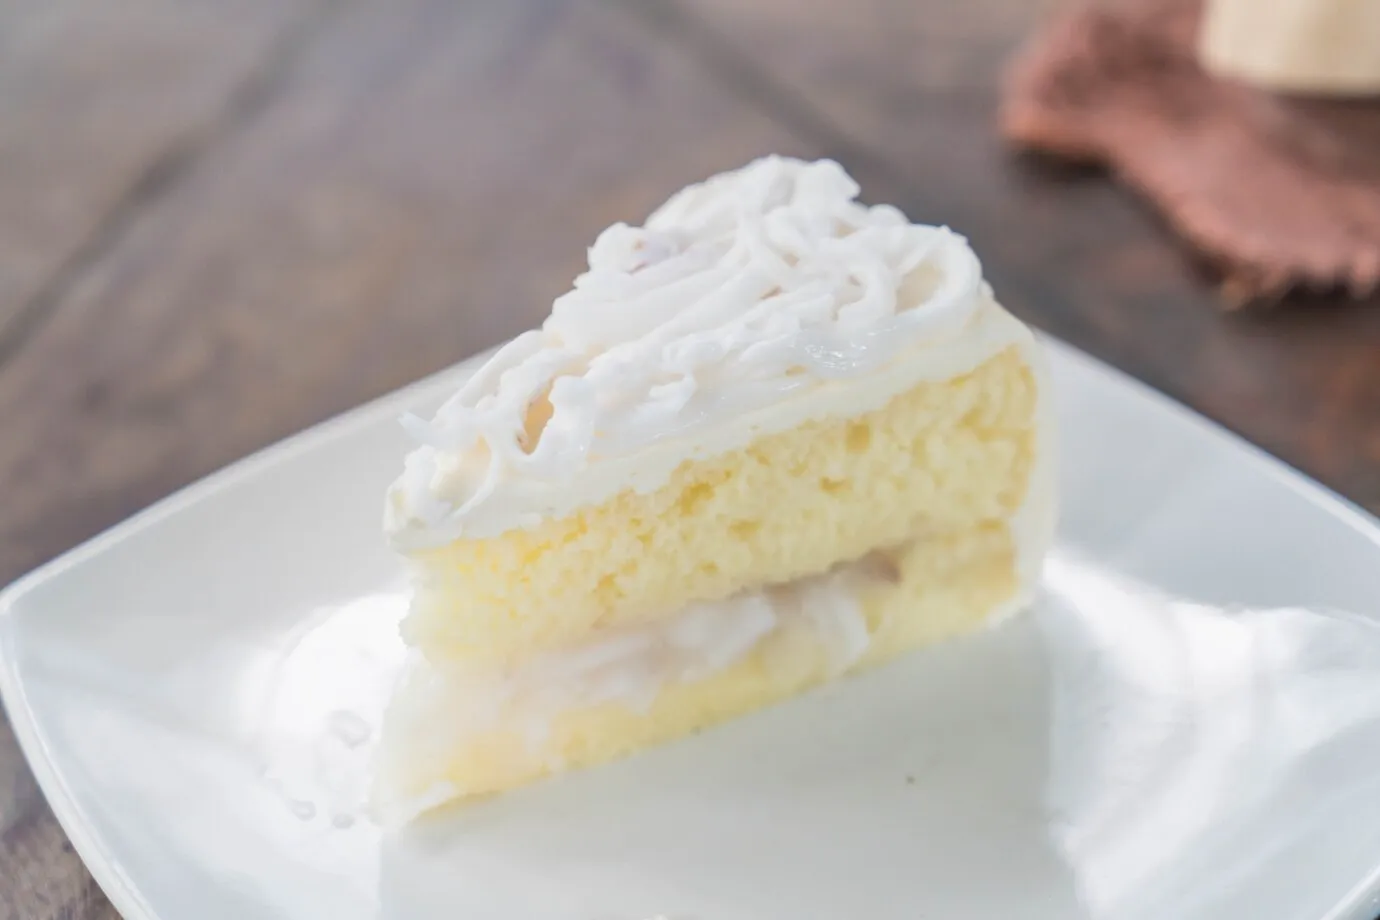 coconut-flavored cake 